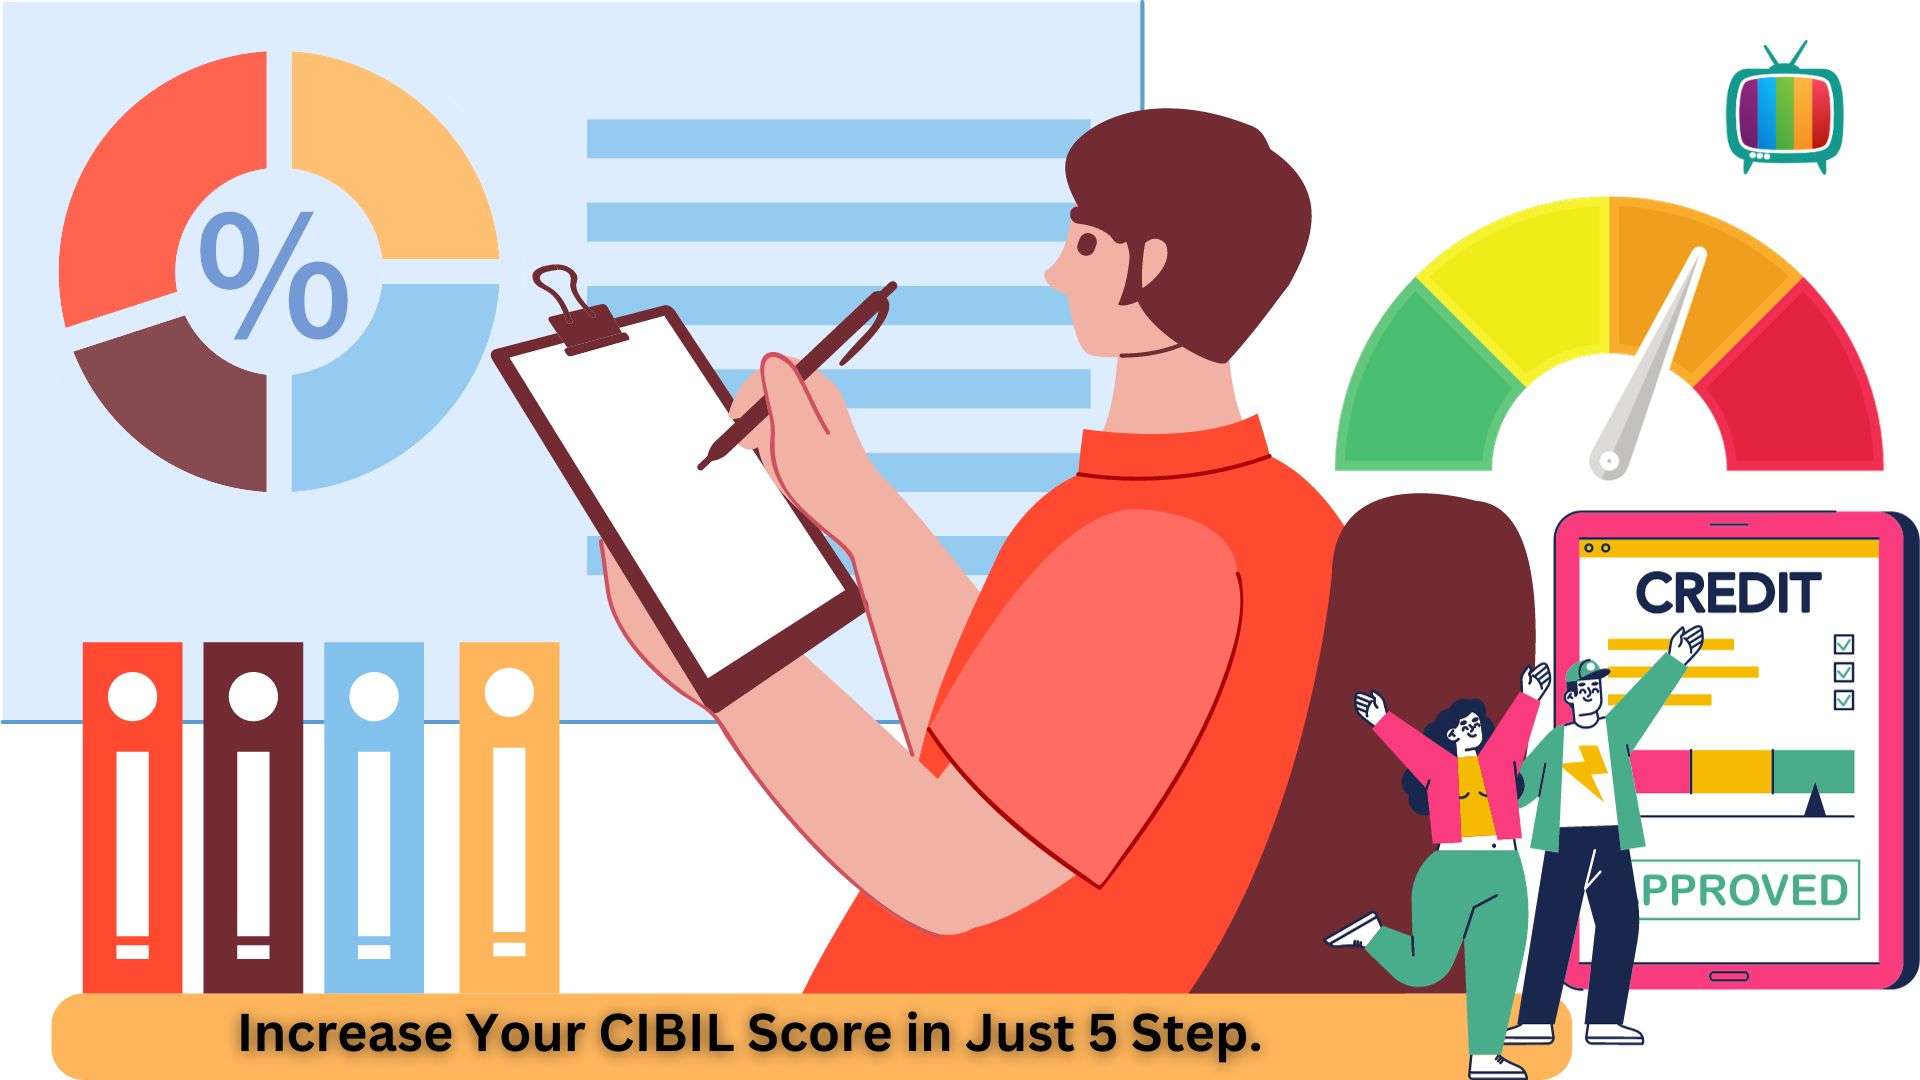 Increase Your Cibil Score in Just 5 Step